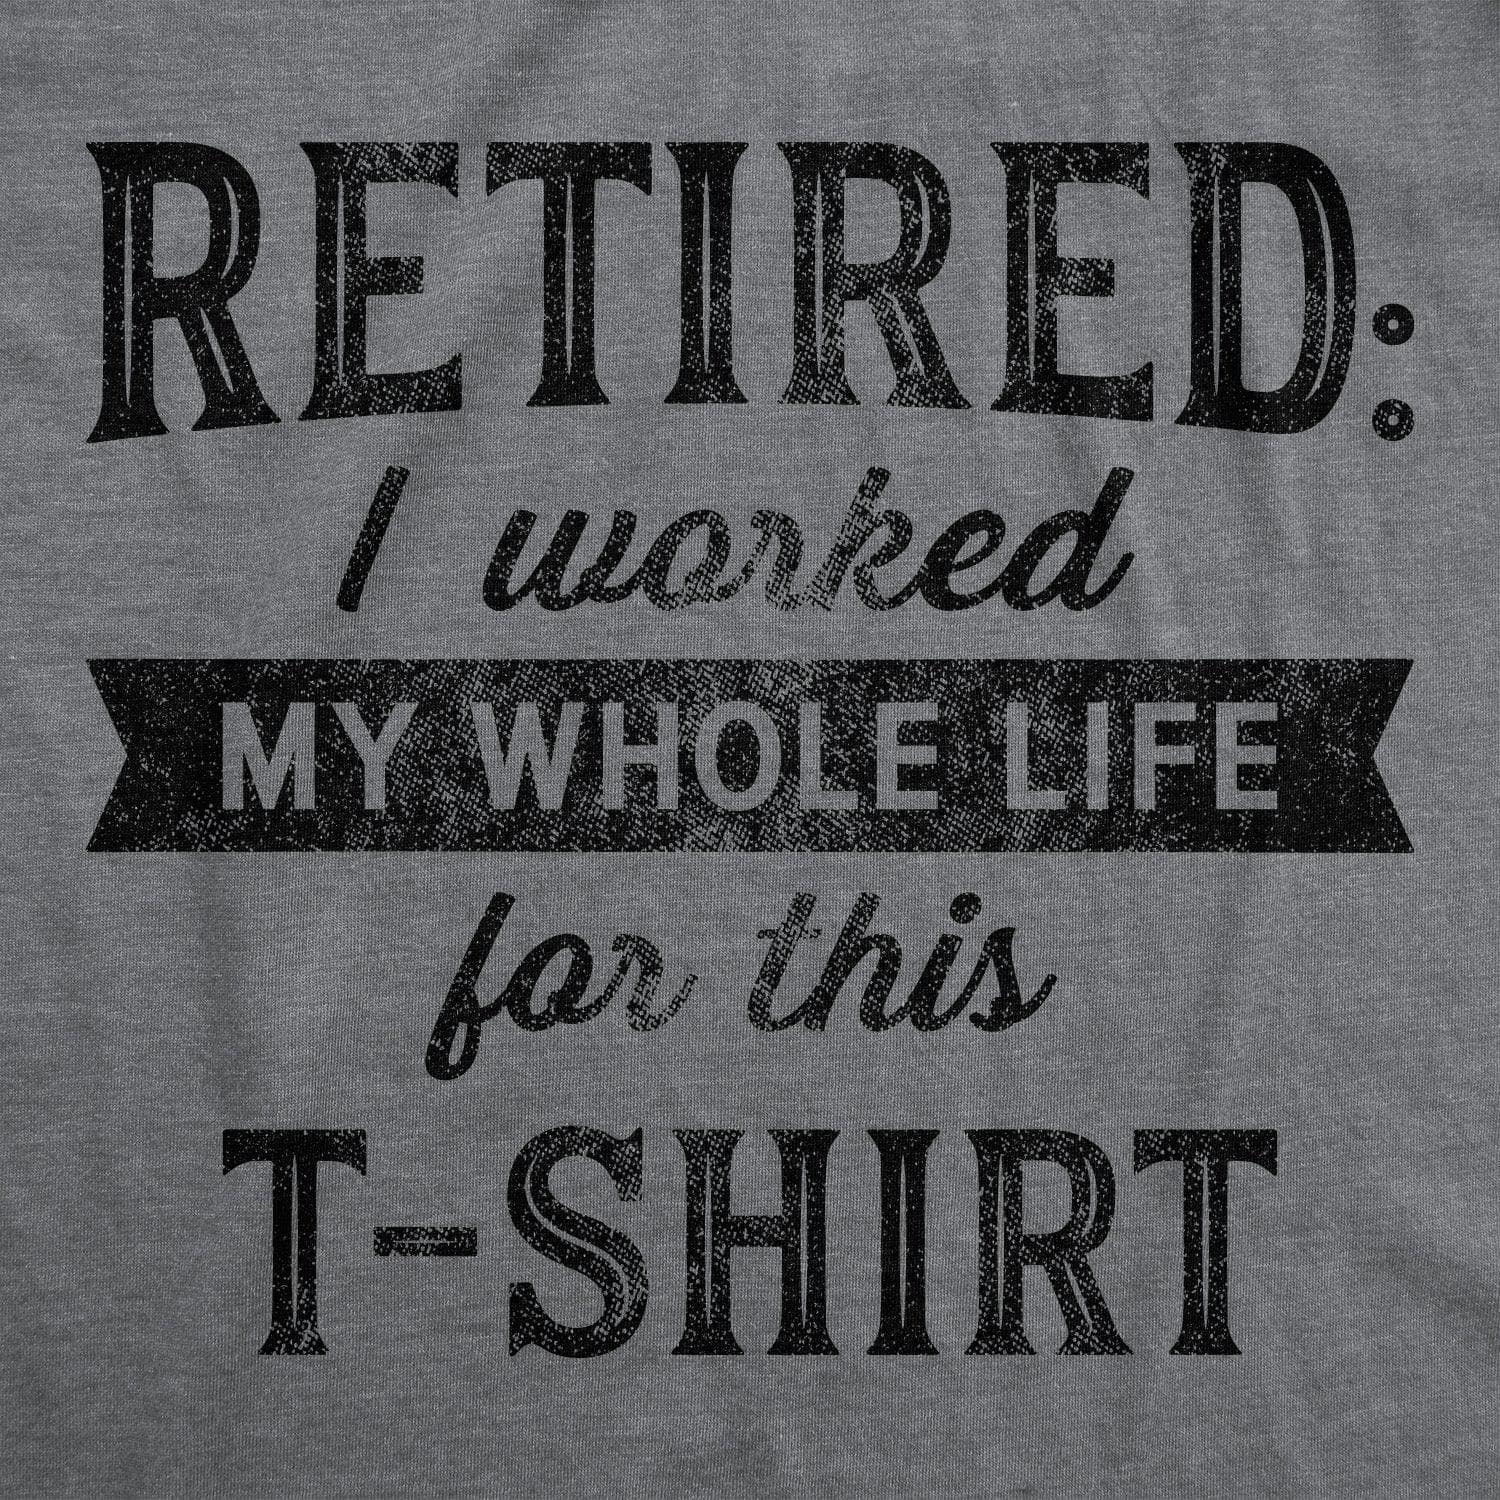 Retired I Worked My Whole Life For This Shirt Women's Tshirt  -  Crazy Dog T-Shirts